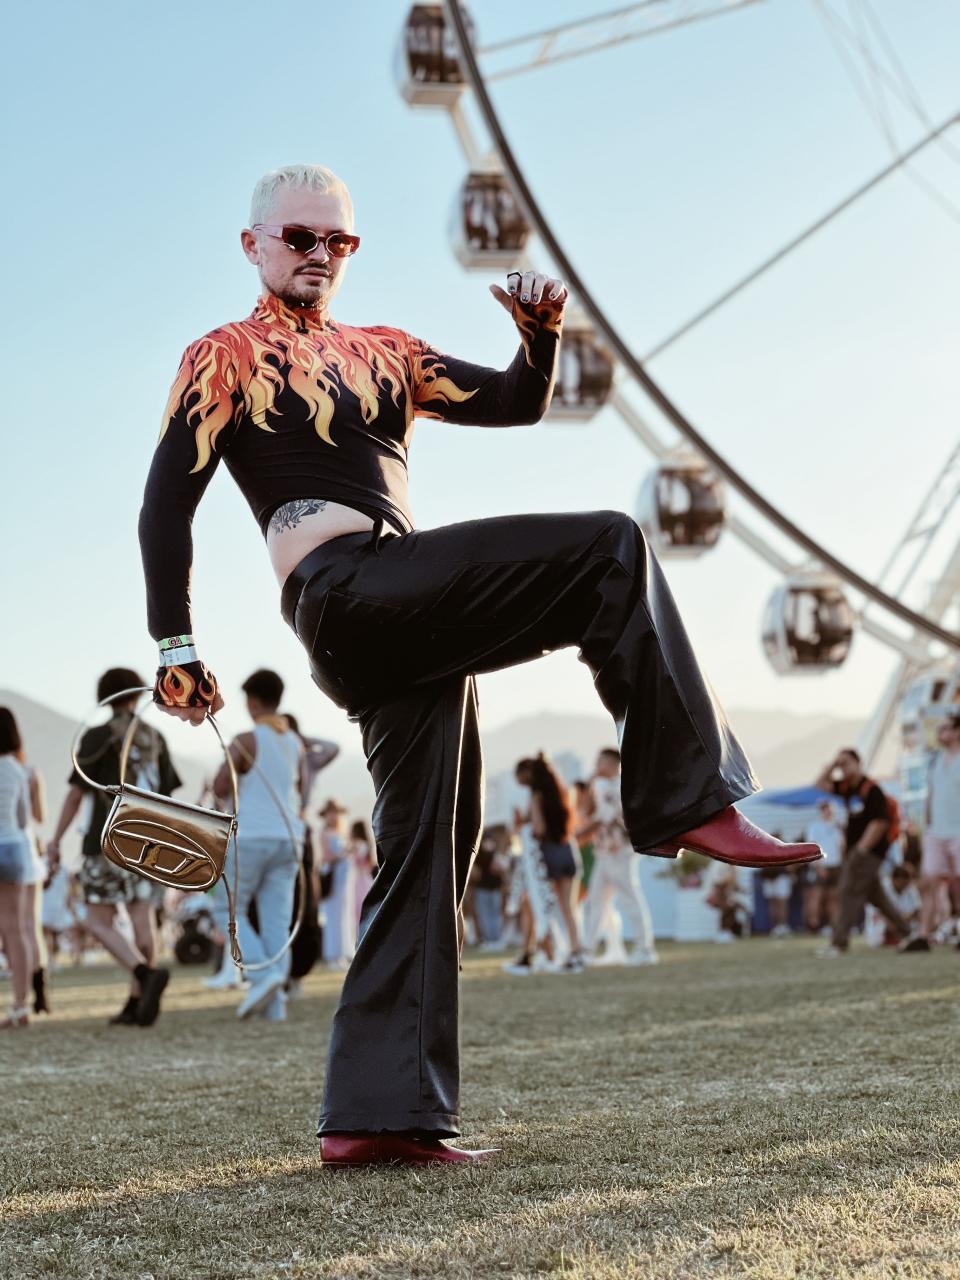 Christian Grotewold posing for photo in flame top at coachella music festival